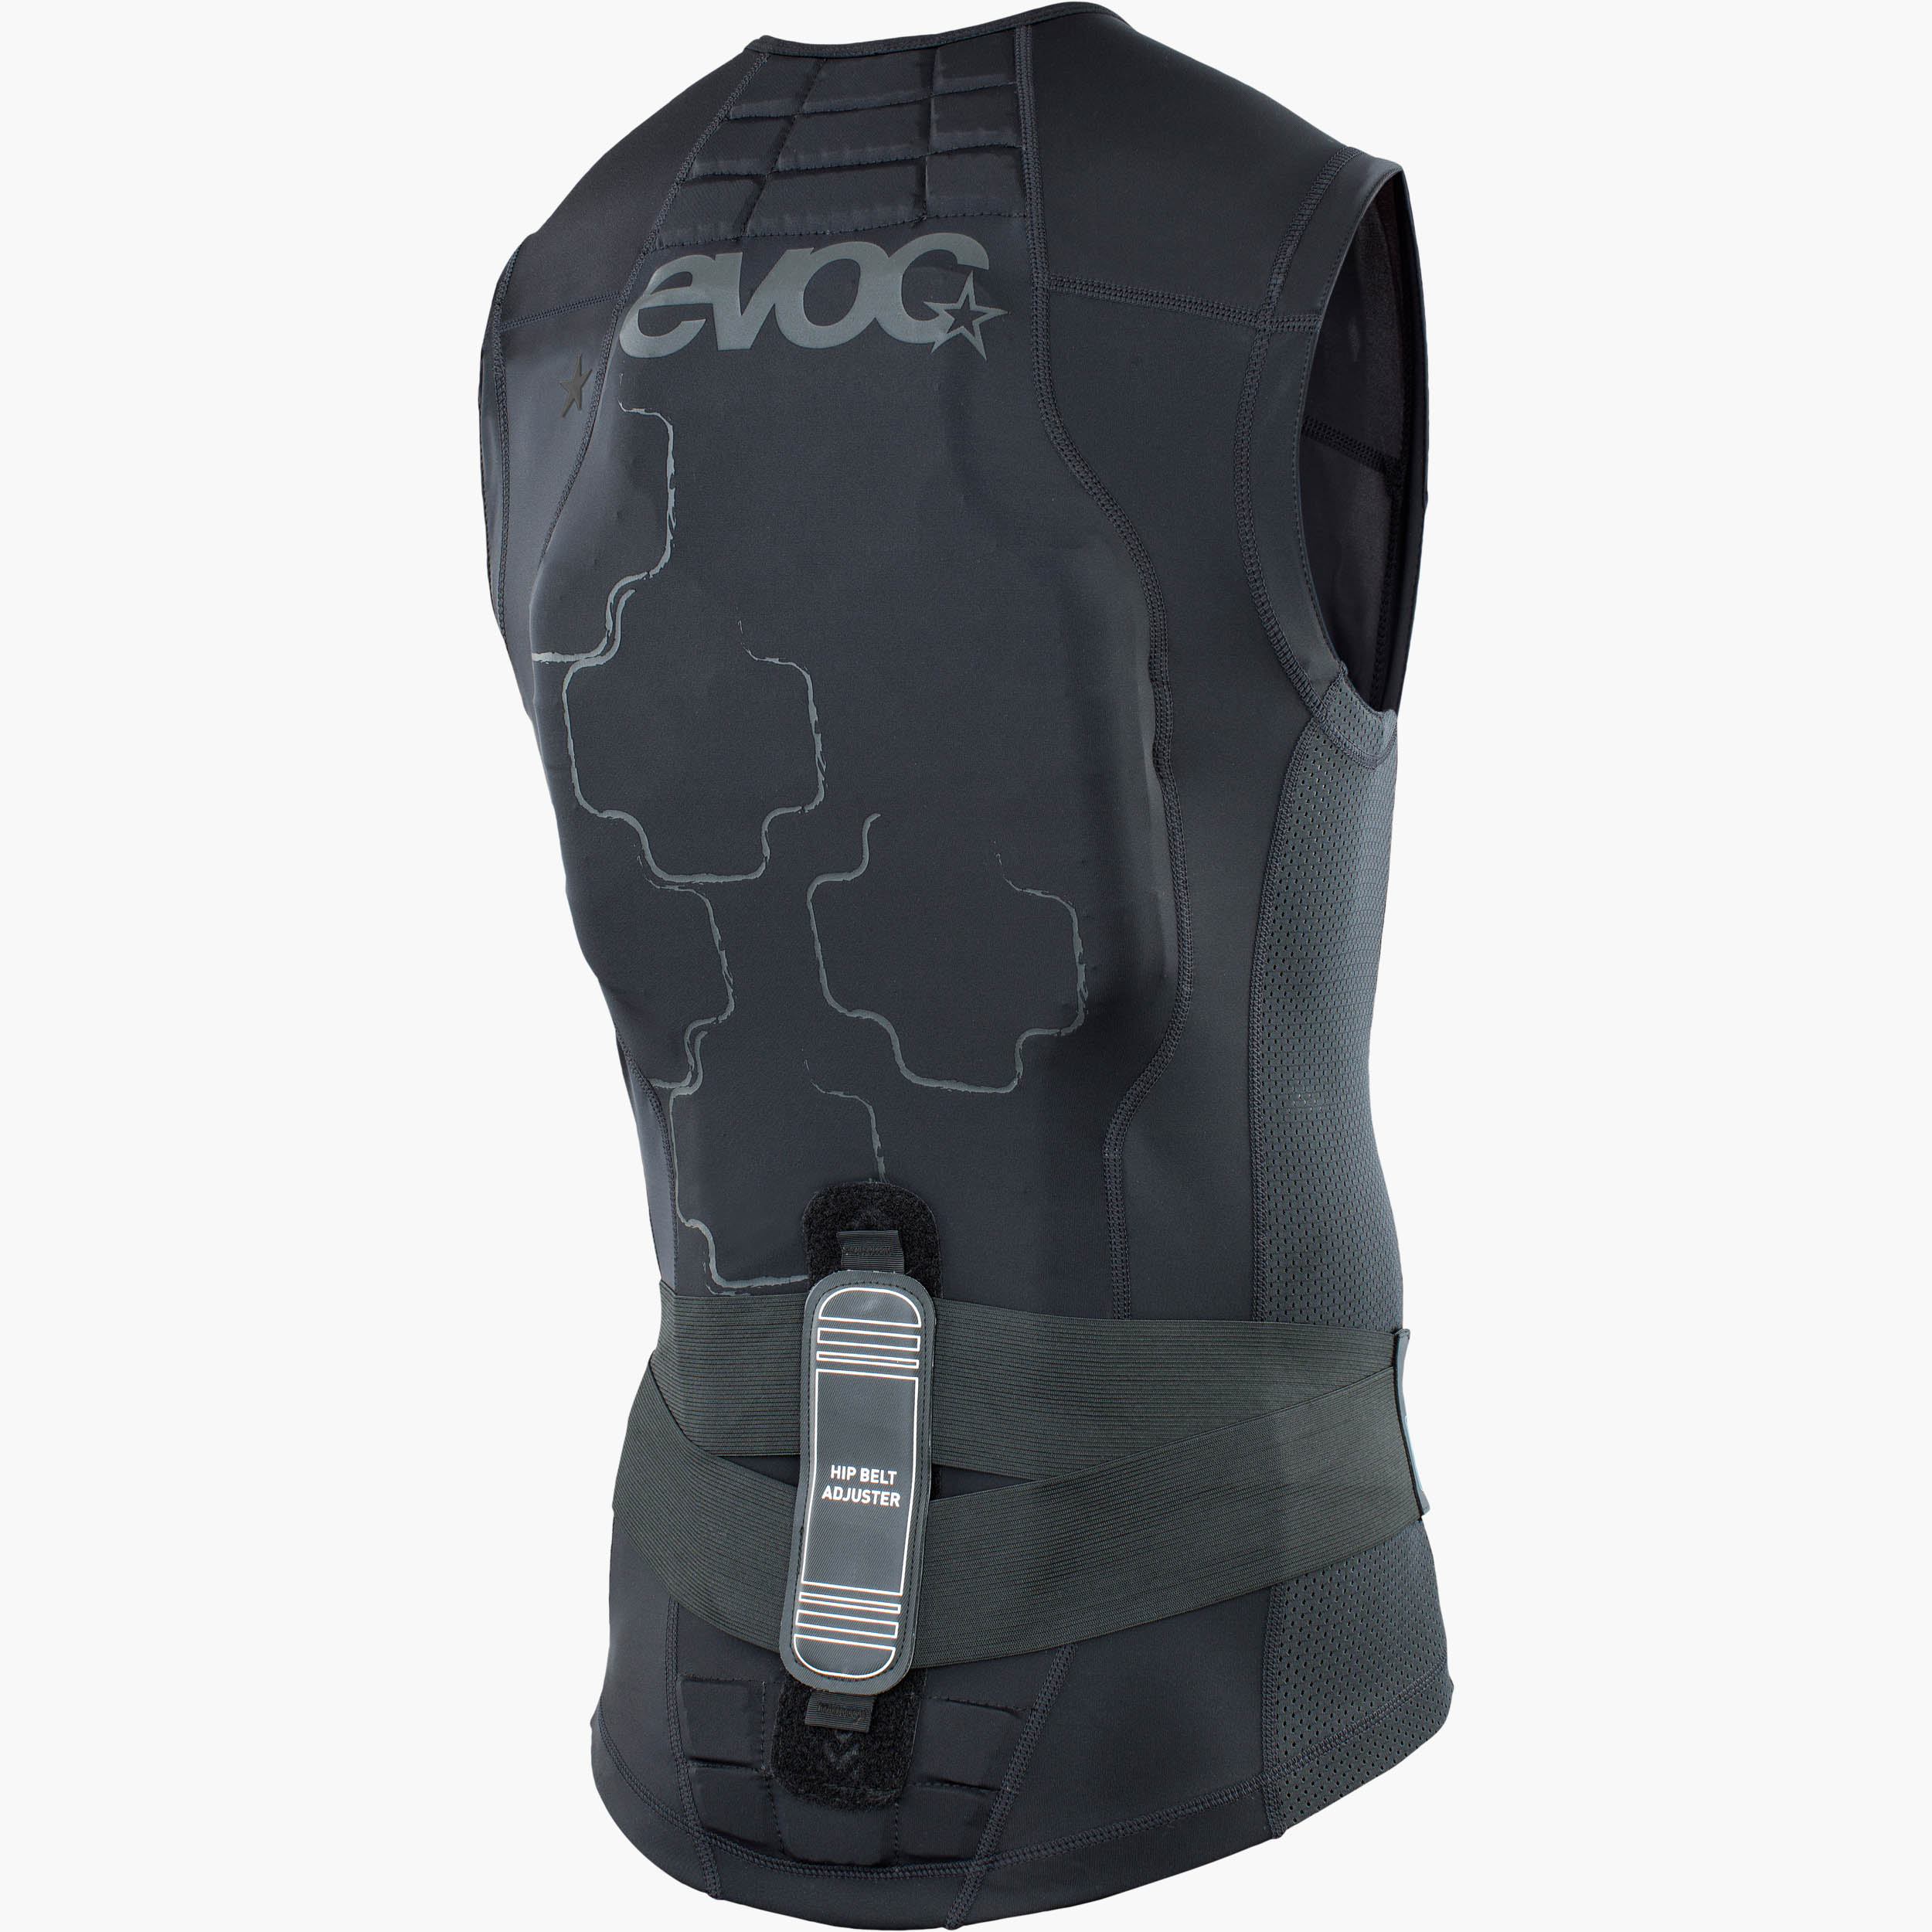 No Fear Soft Back Protector Unisex Protectors Ventilated Lightweight 